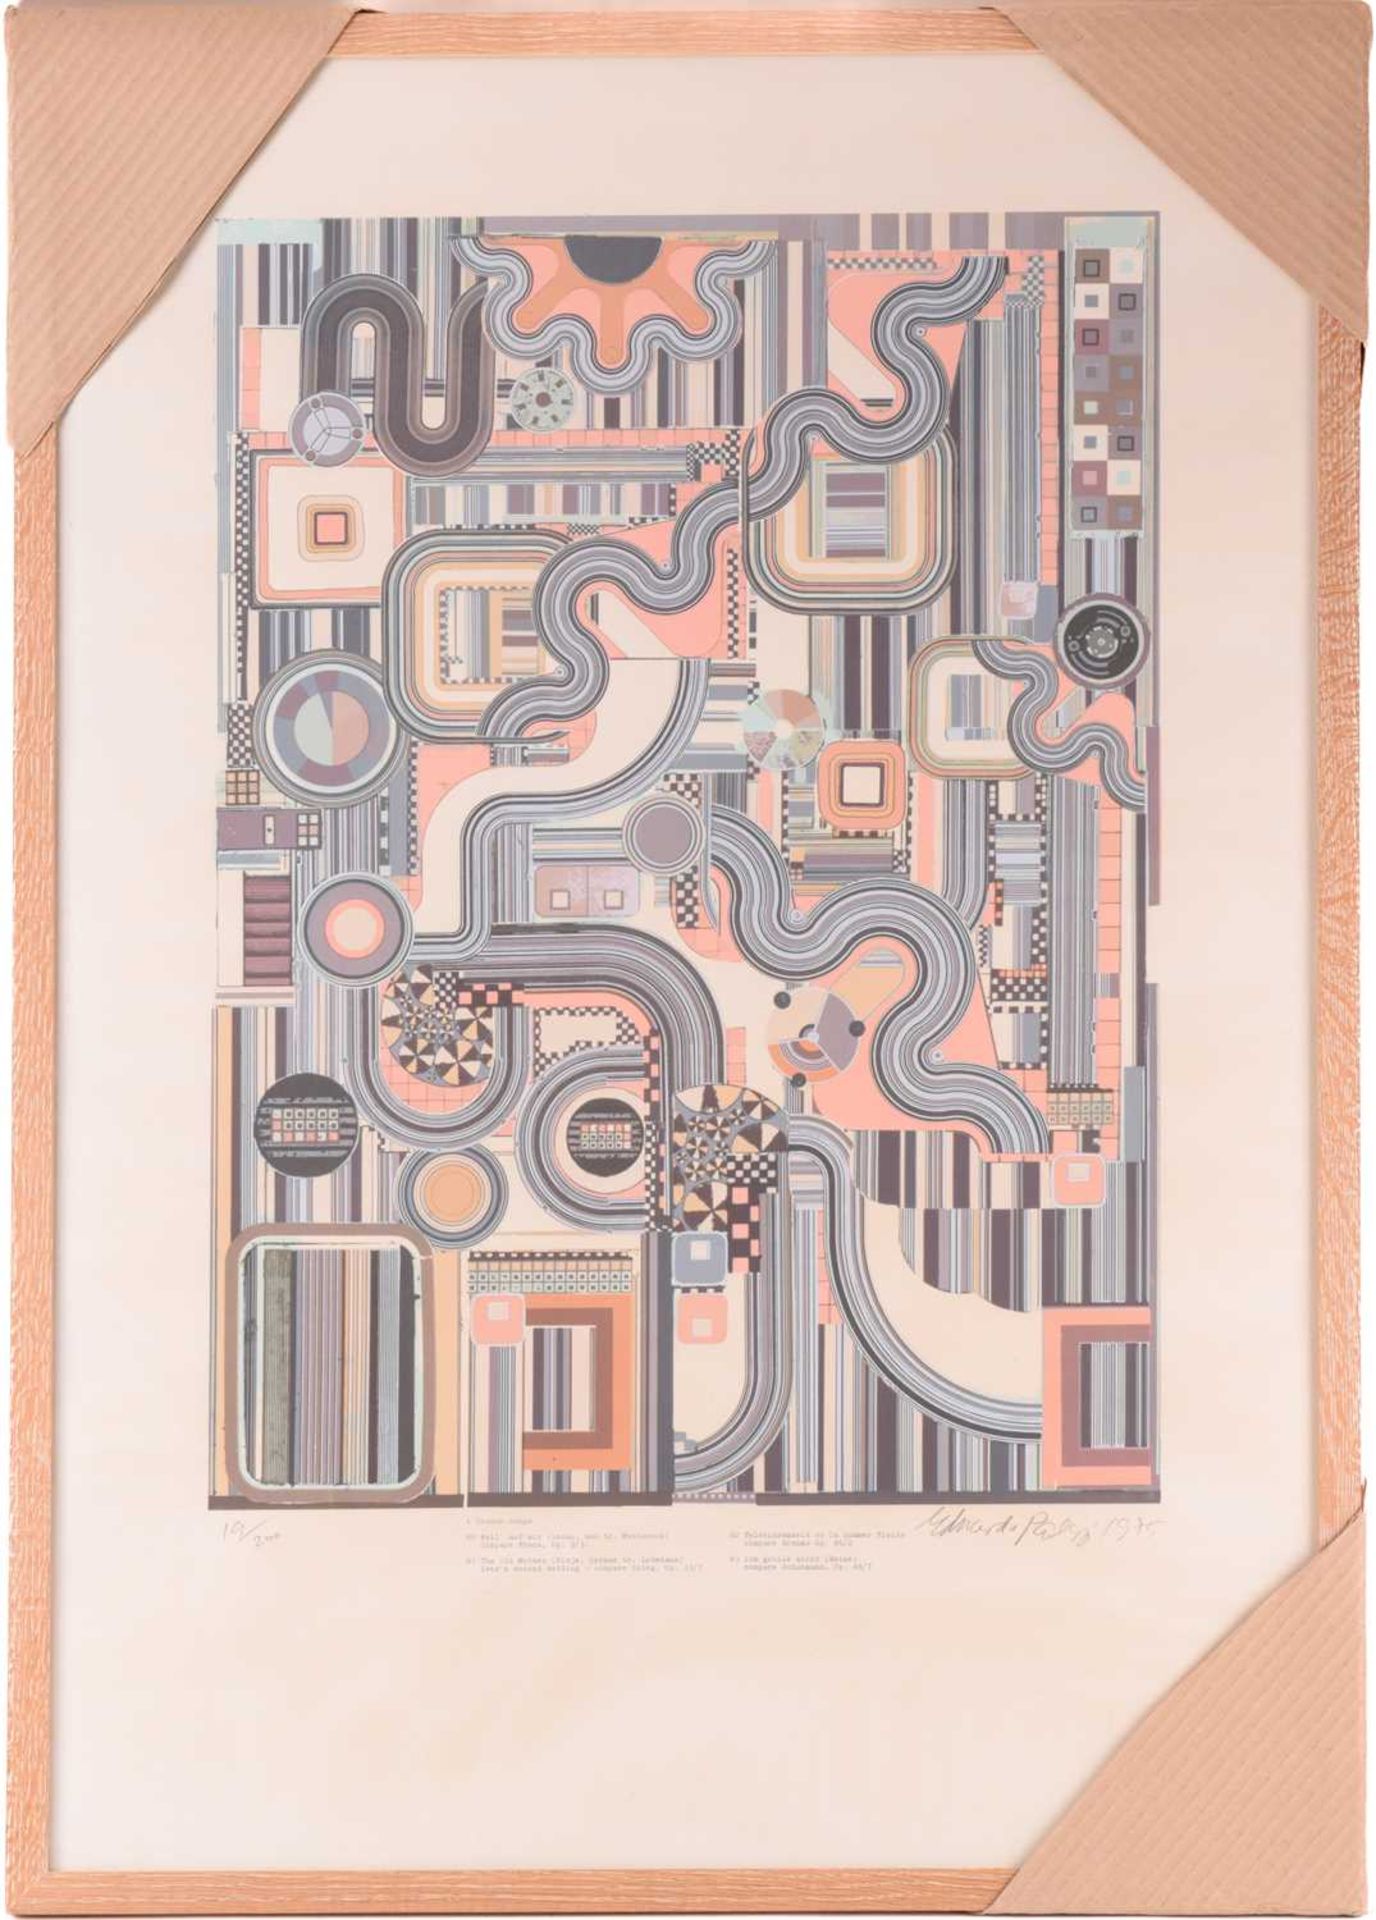 Sir Eduardo Paolozzi (1924 - 2005), 4 German Songs (from the Calcium Light Night series), signed and